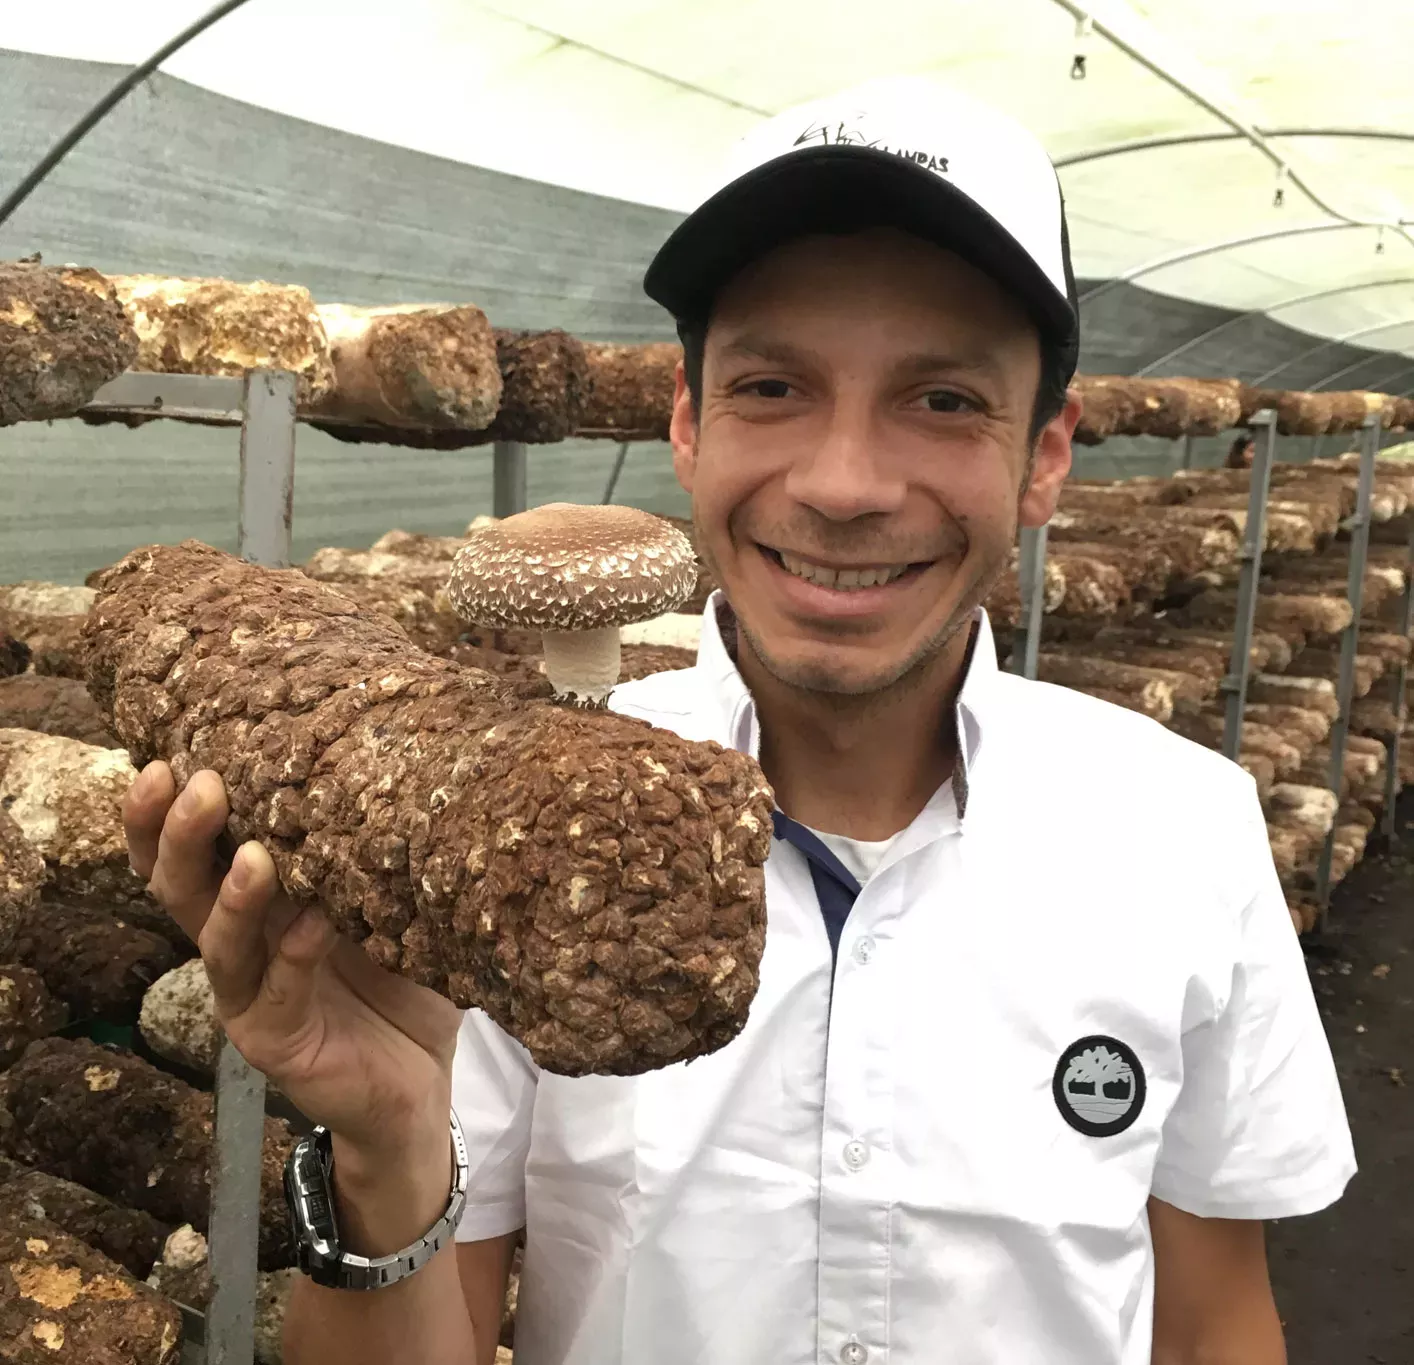 Colombian fungi producer holding a log covered in fungi